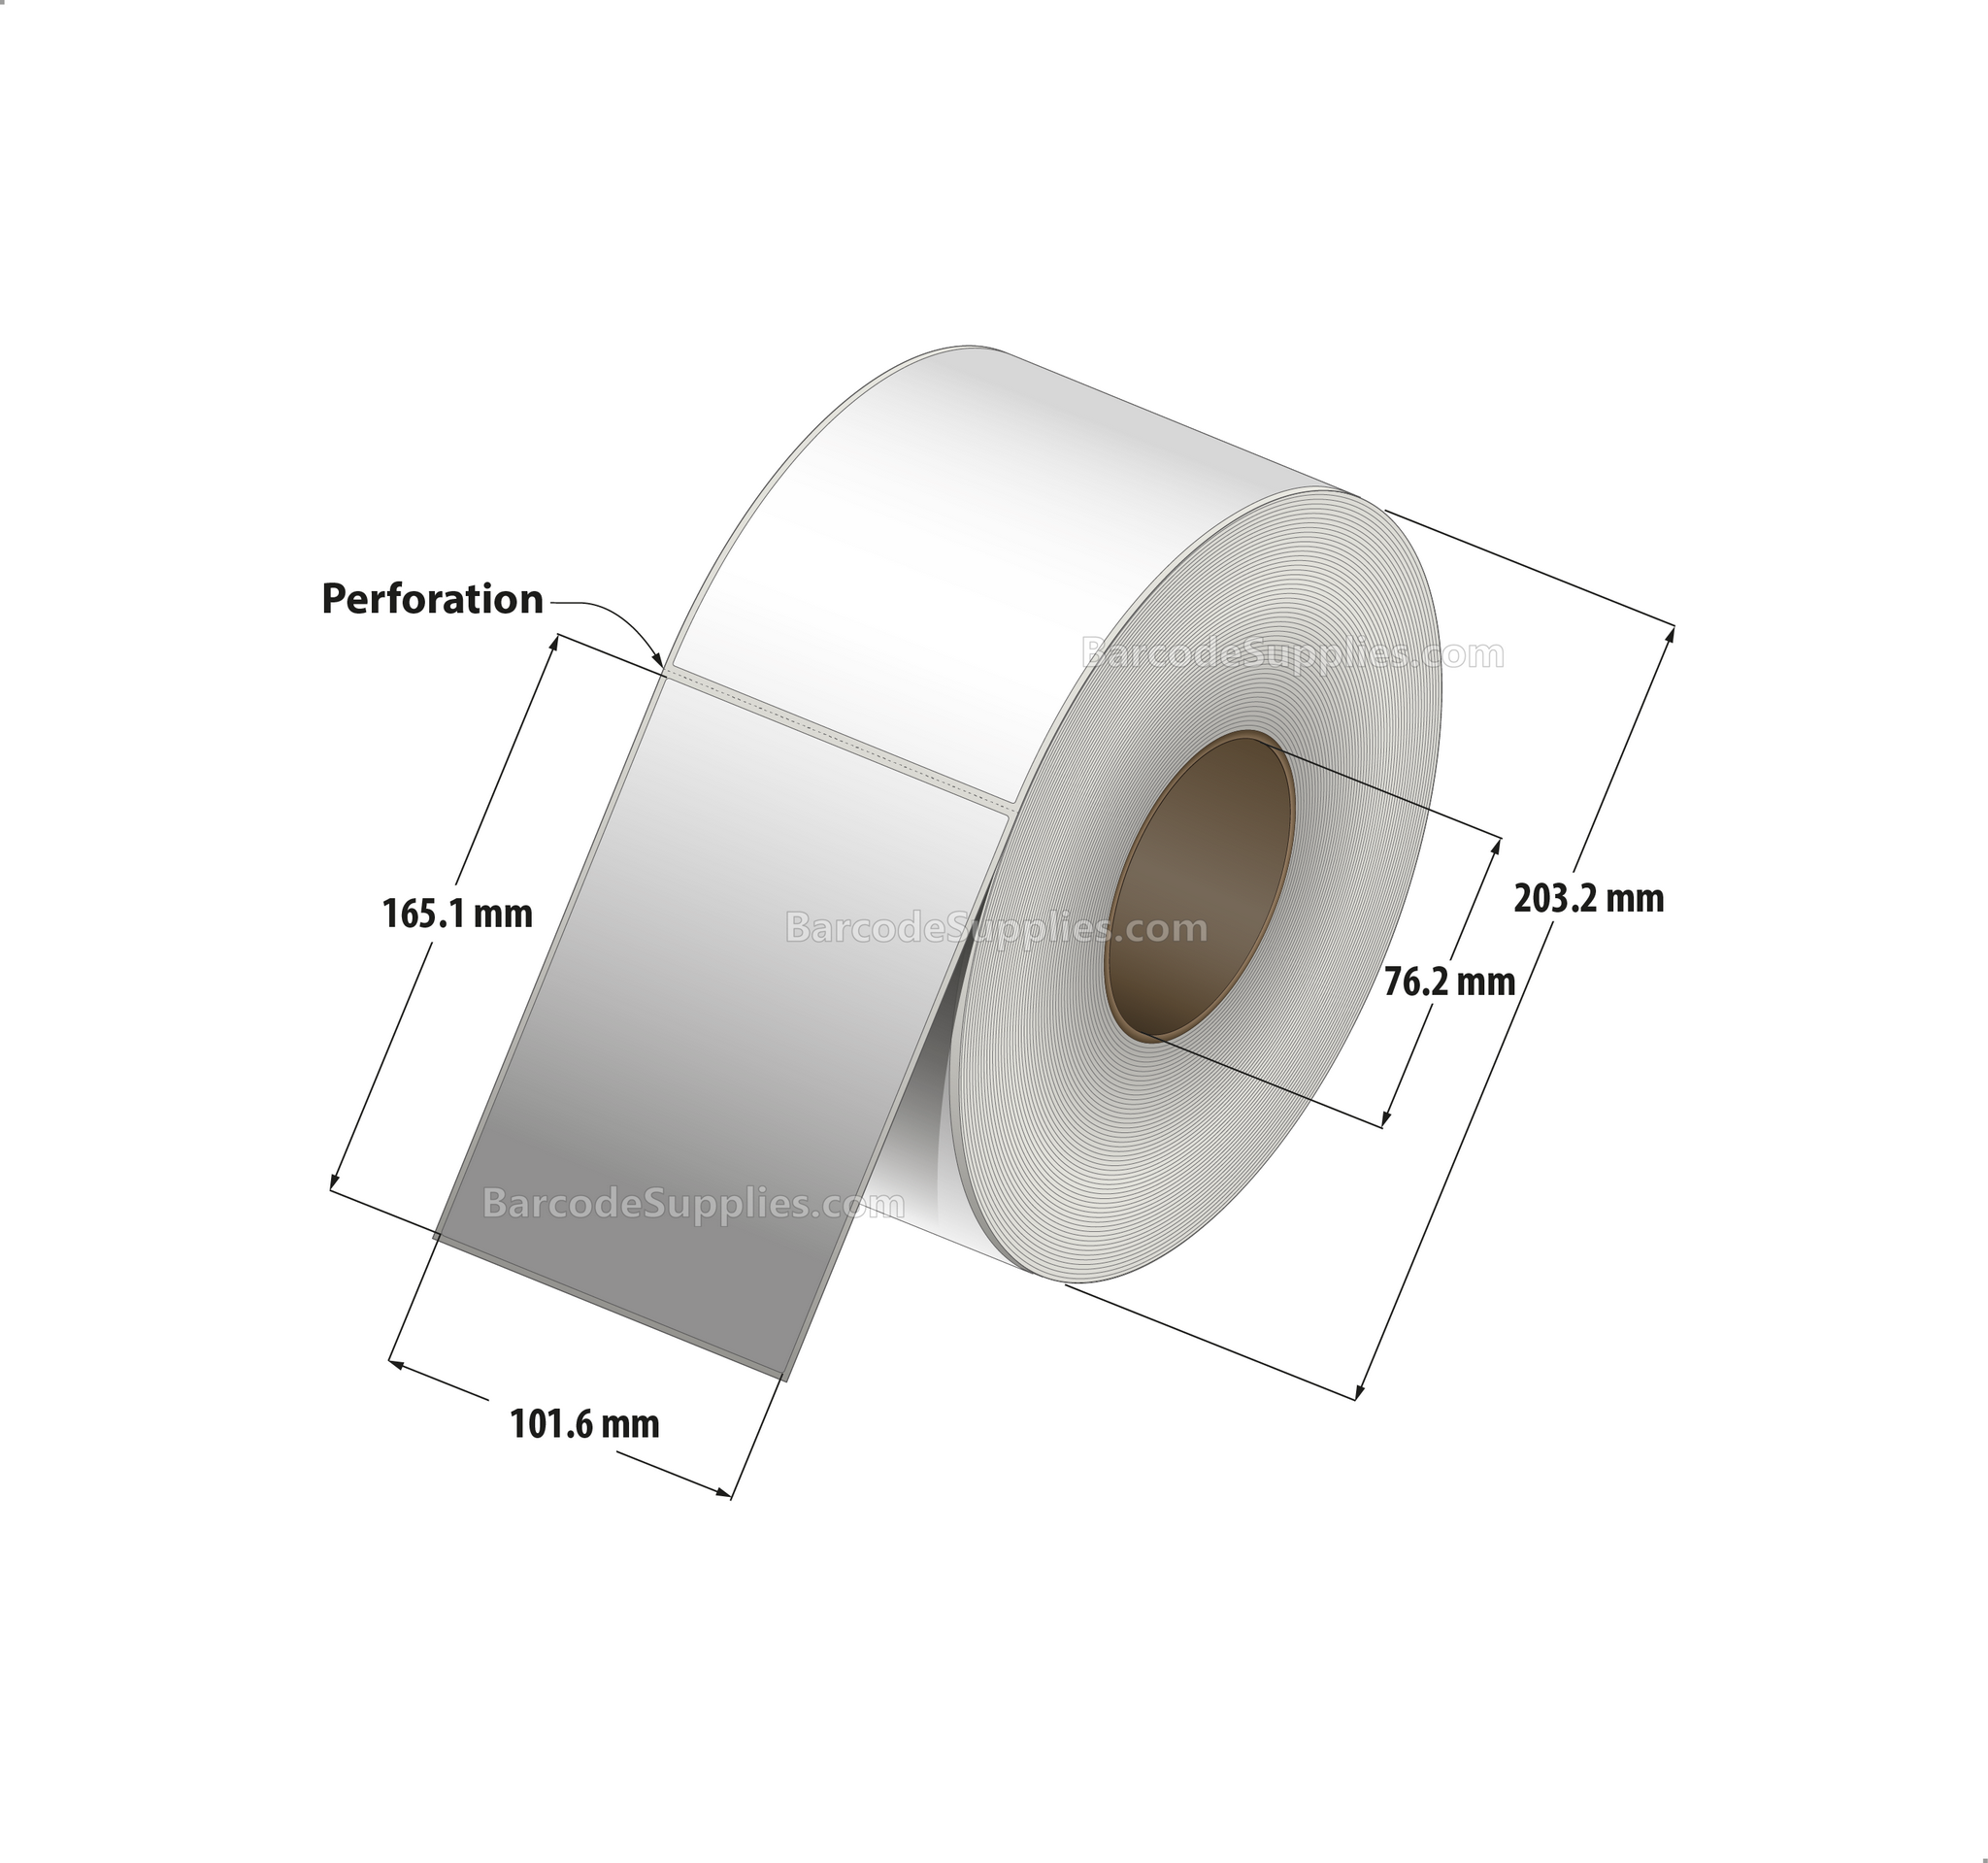 4 x 6.5 Thermal Transfer White Labels With Removable Adhesive - Perforated - 900 Labels Per Roll - Carton Of 4 Rolls - 3600 Labels Total - MPN: TH465-1PREM